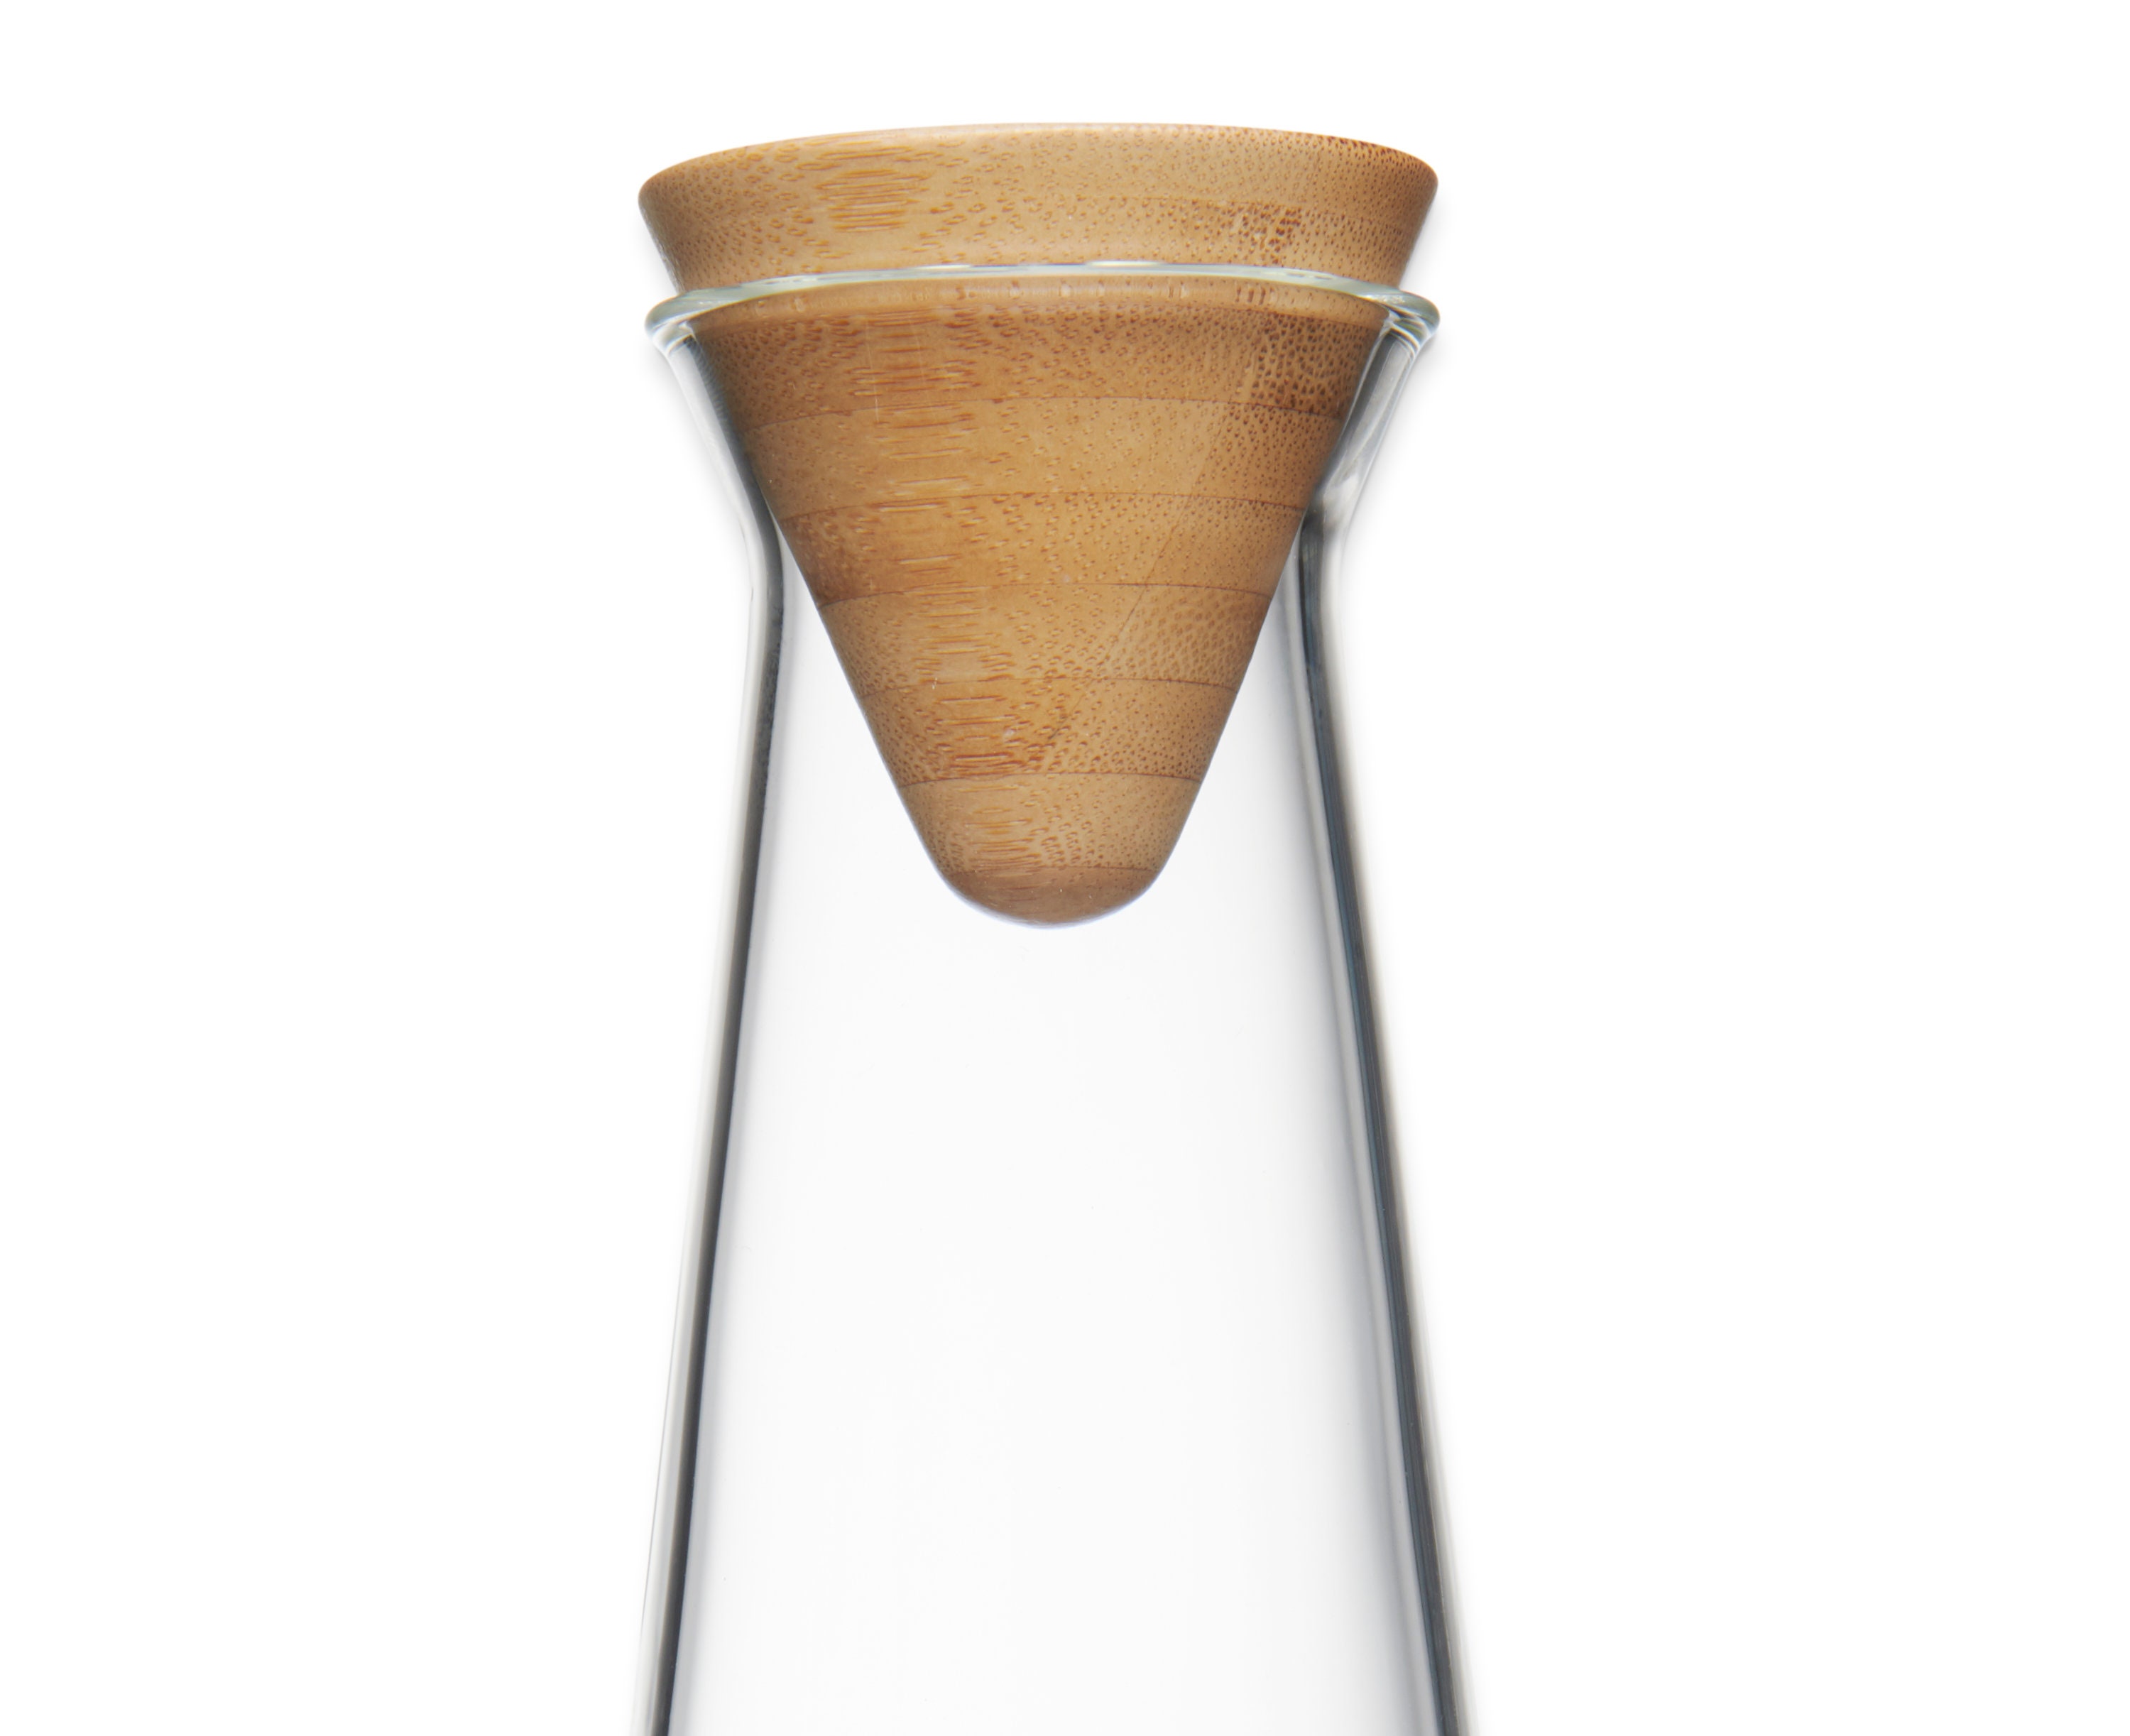 blomus Modern Glass Carafe with 360º Pour Silicone Lid on Food52